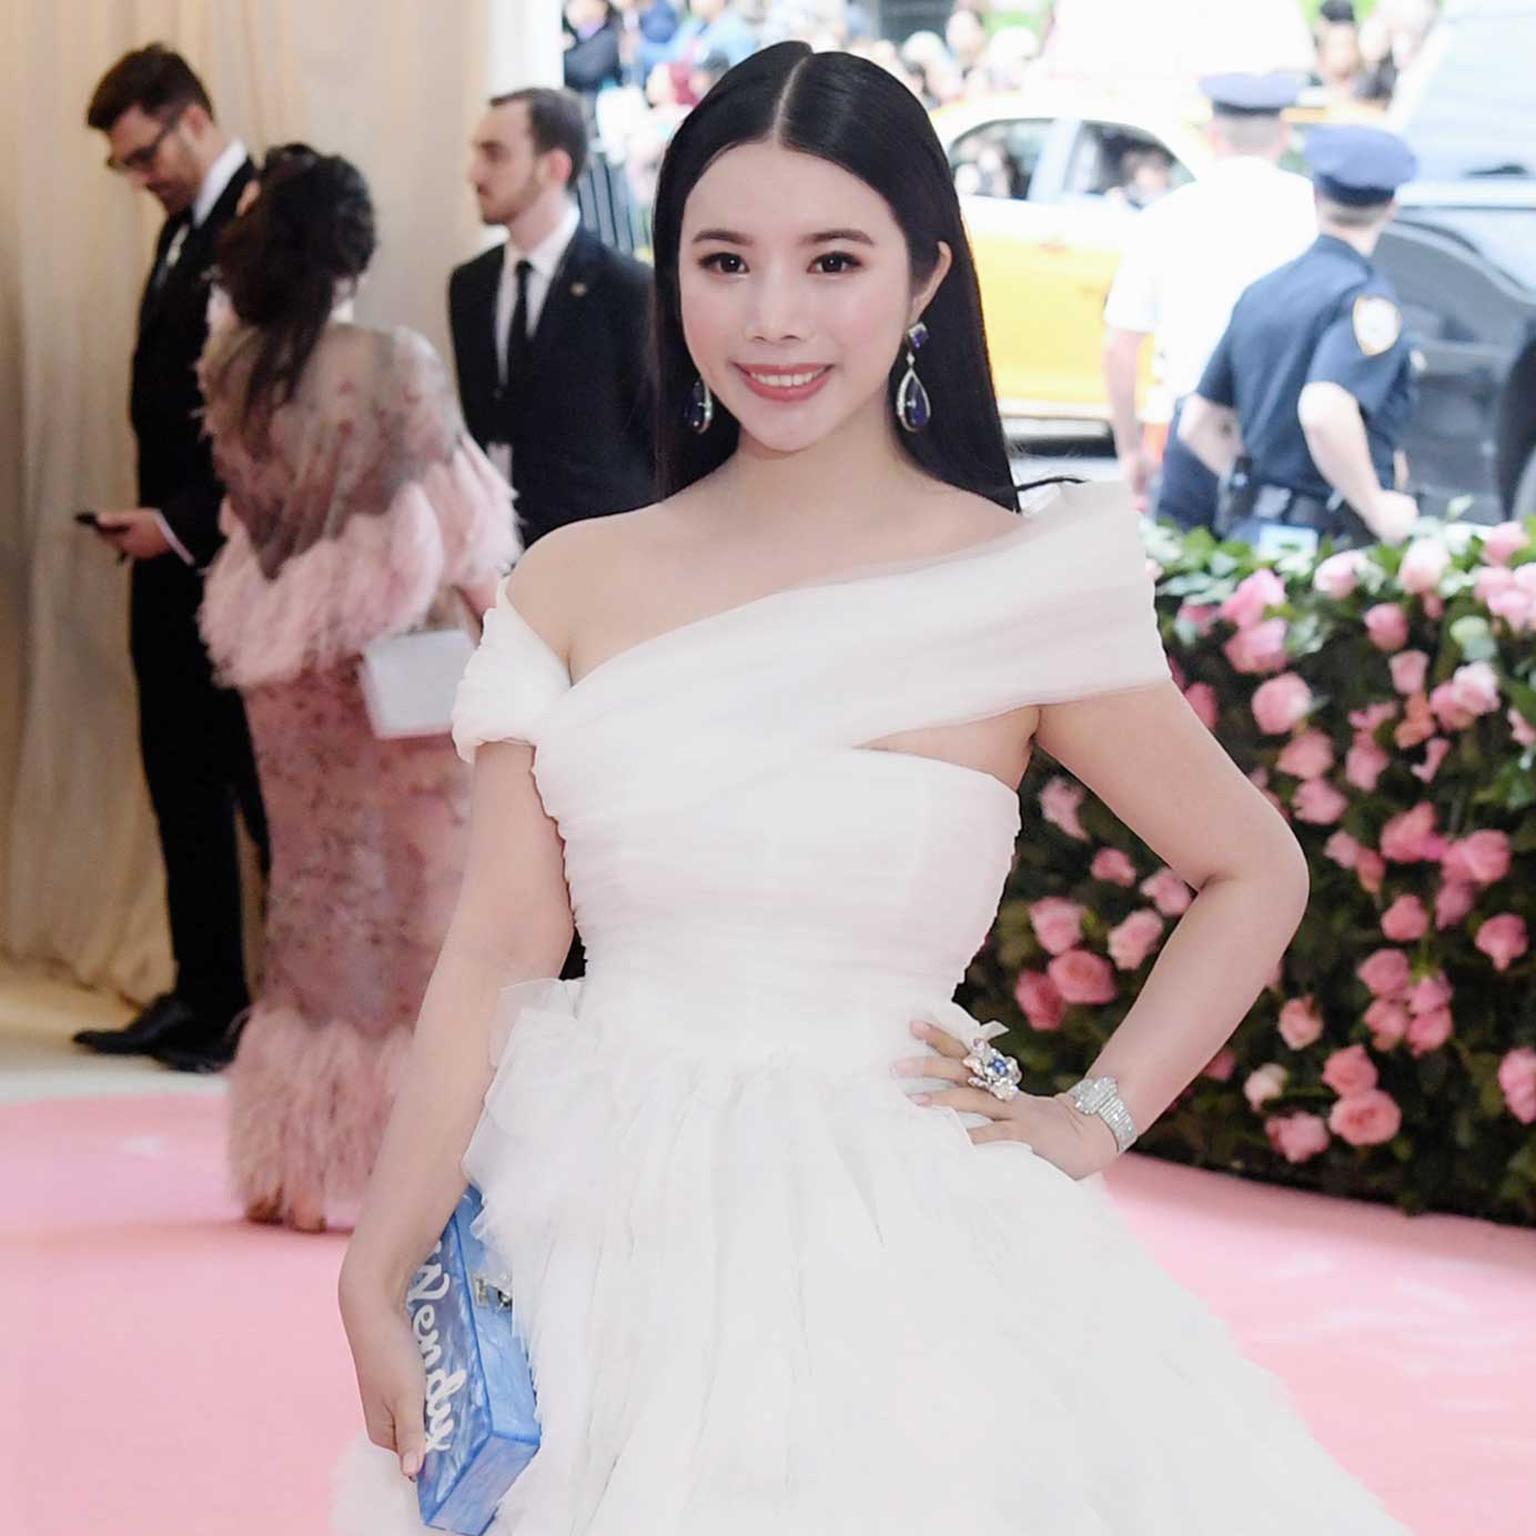 Camp: Notes on Fashion, the best jewels of the 2019 Met Gala